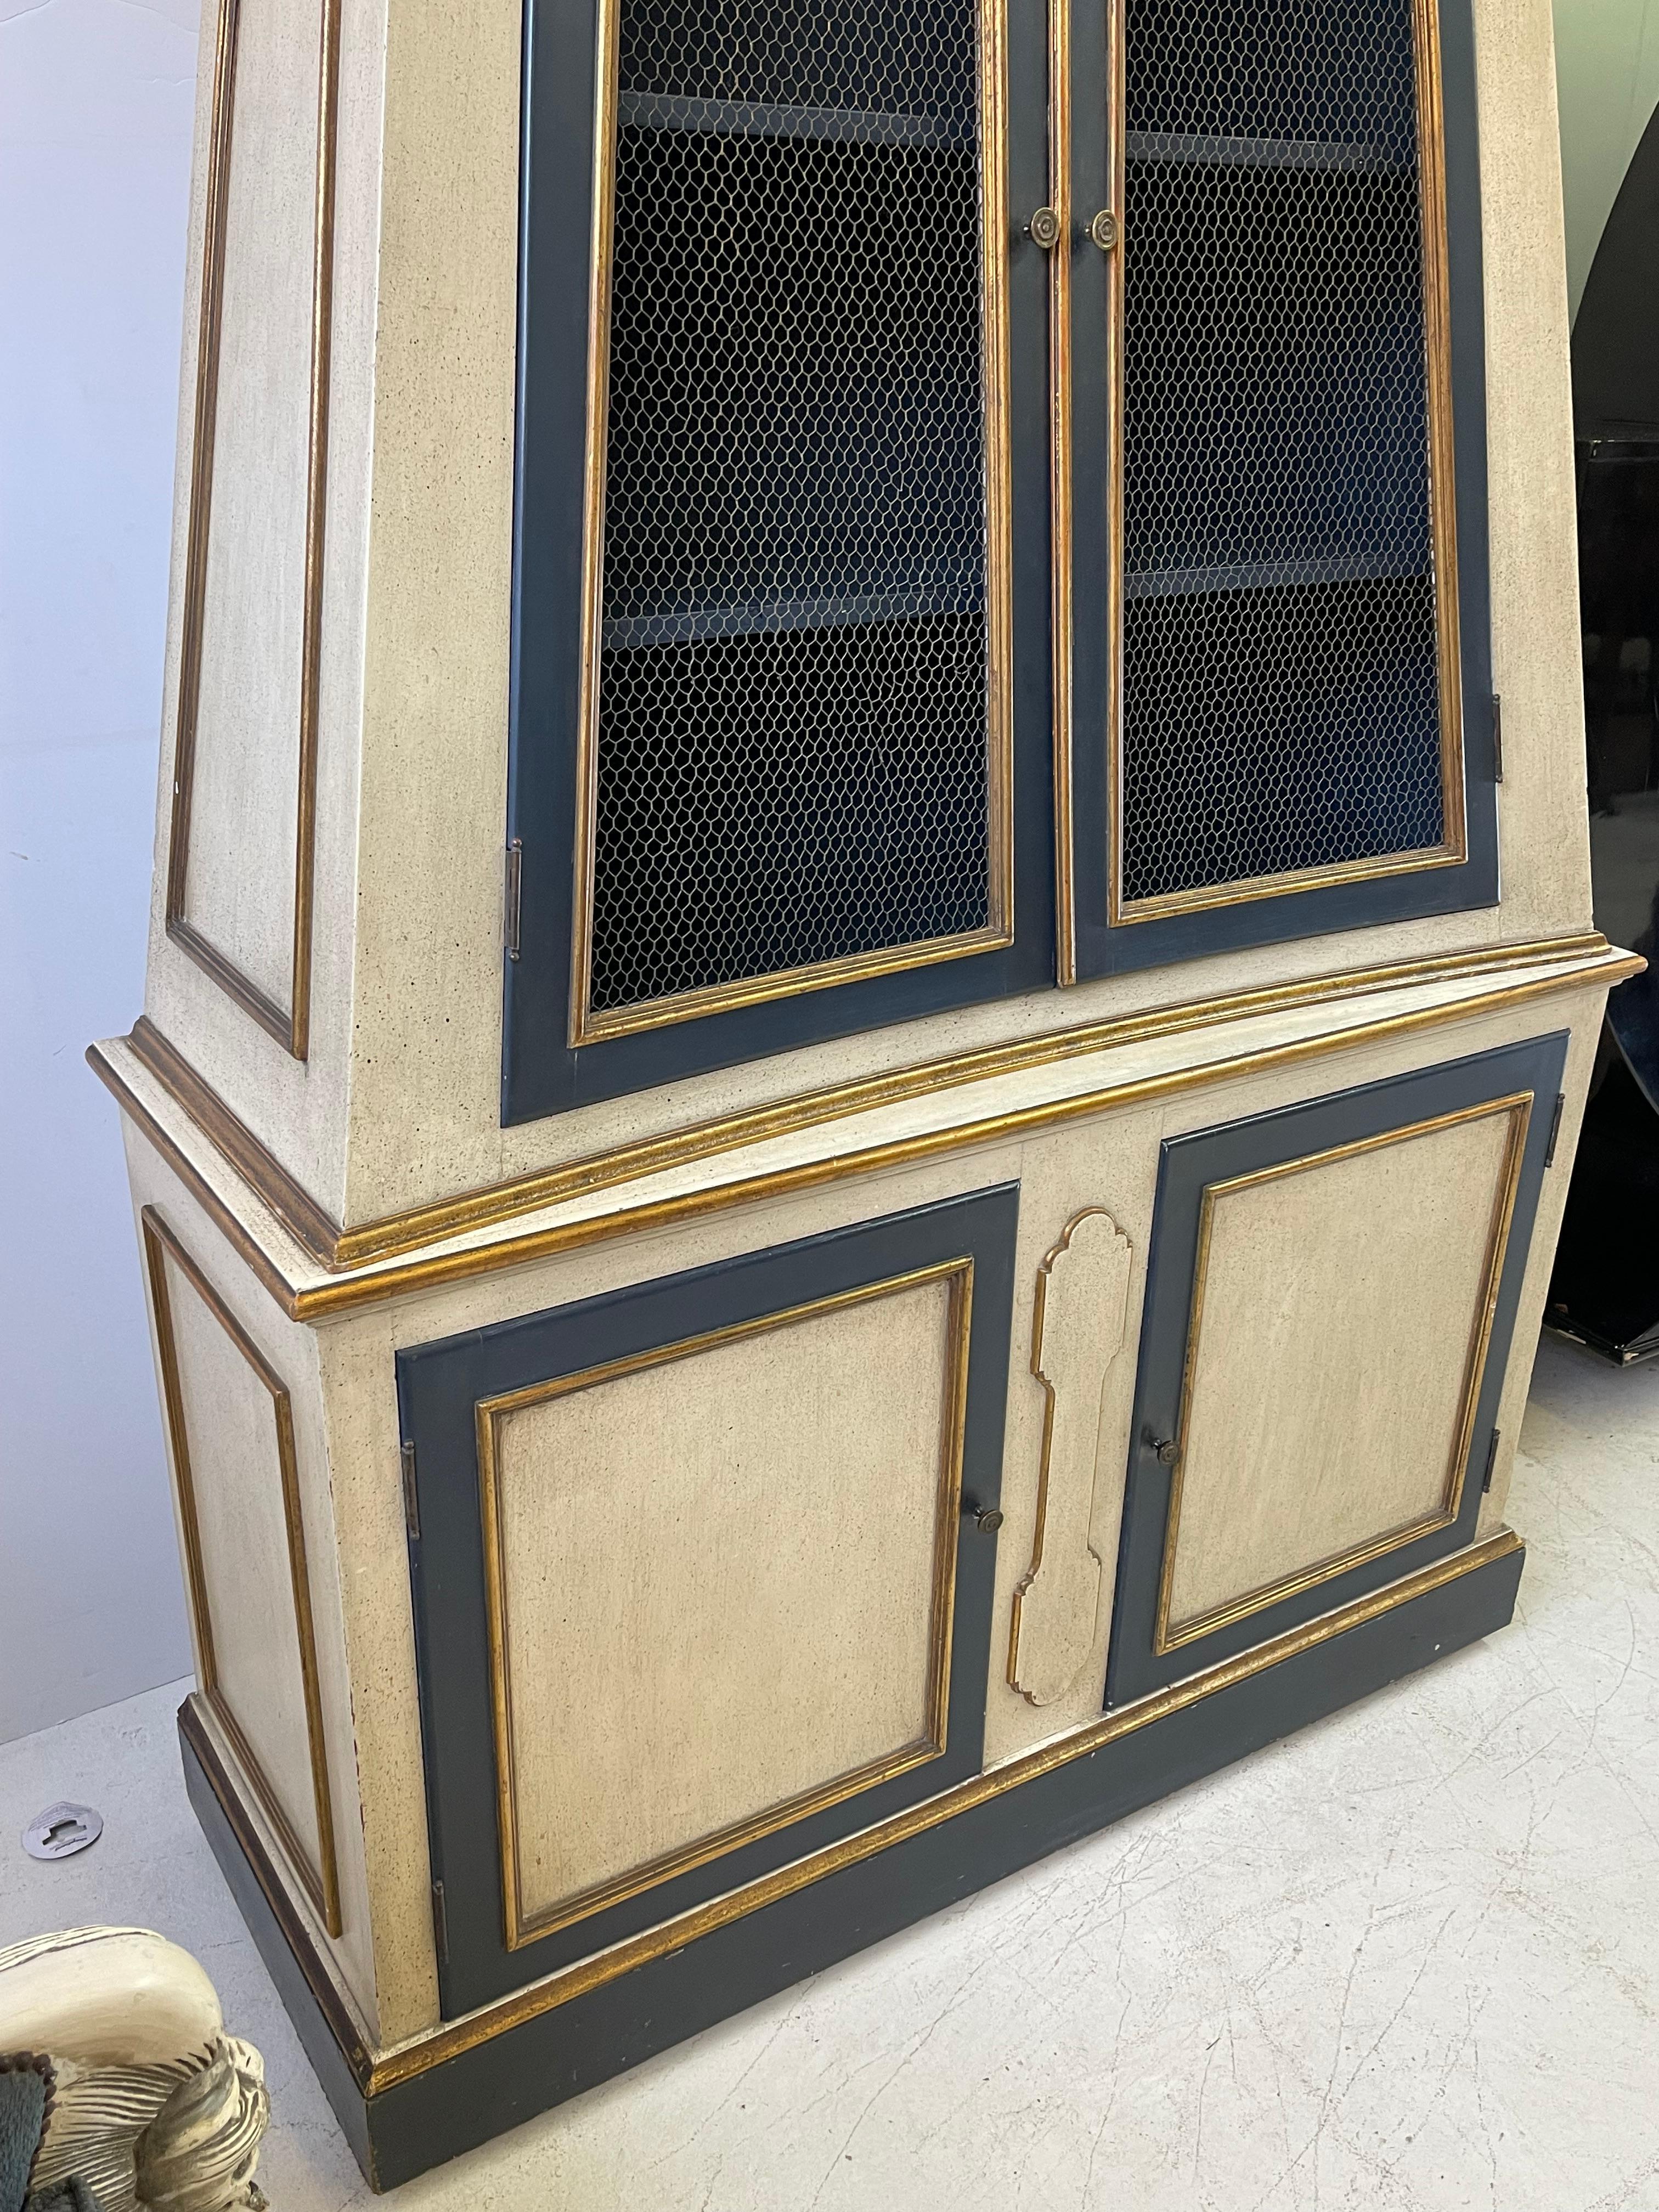 Neoclassical Italian Painted Pyramidal Cabinet with Giltwood Details In Good Condition For Sale In Atlanta, GA